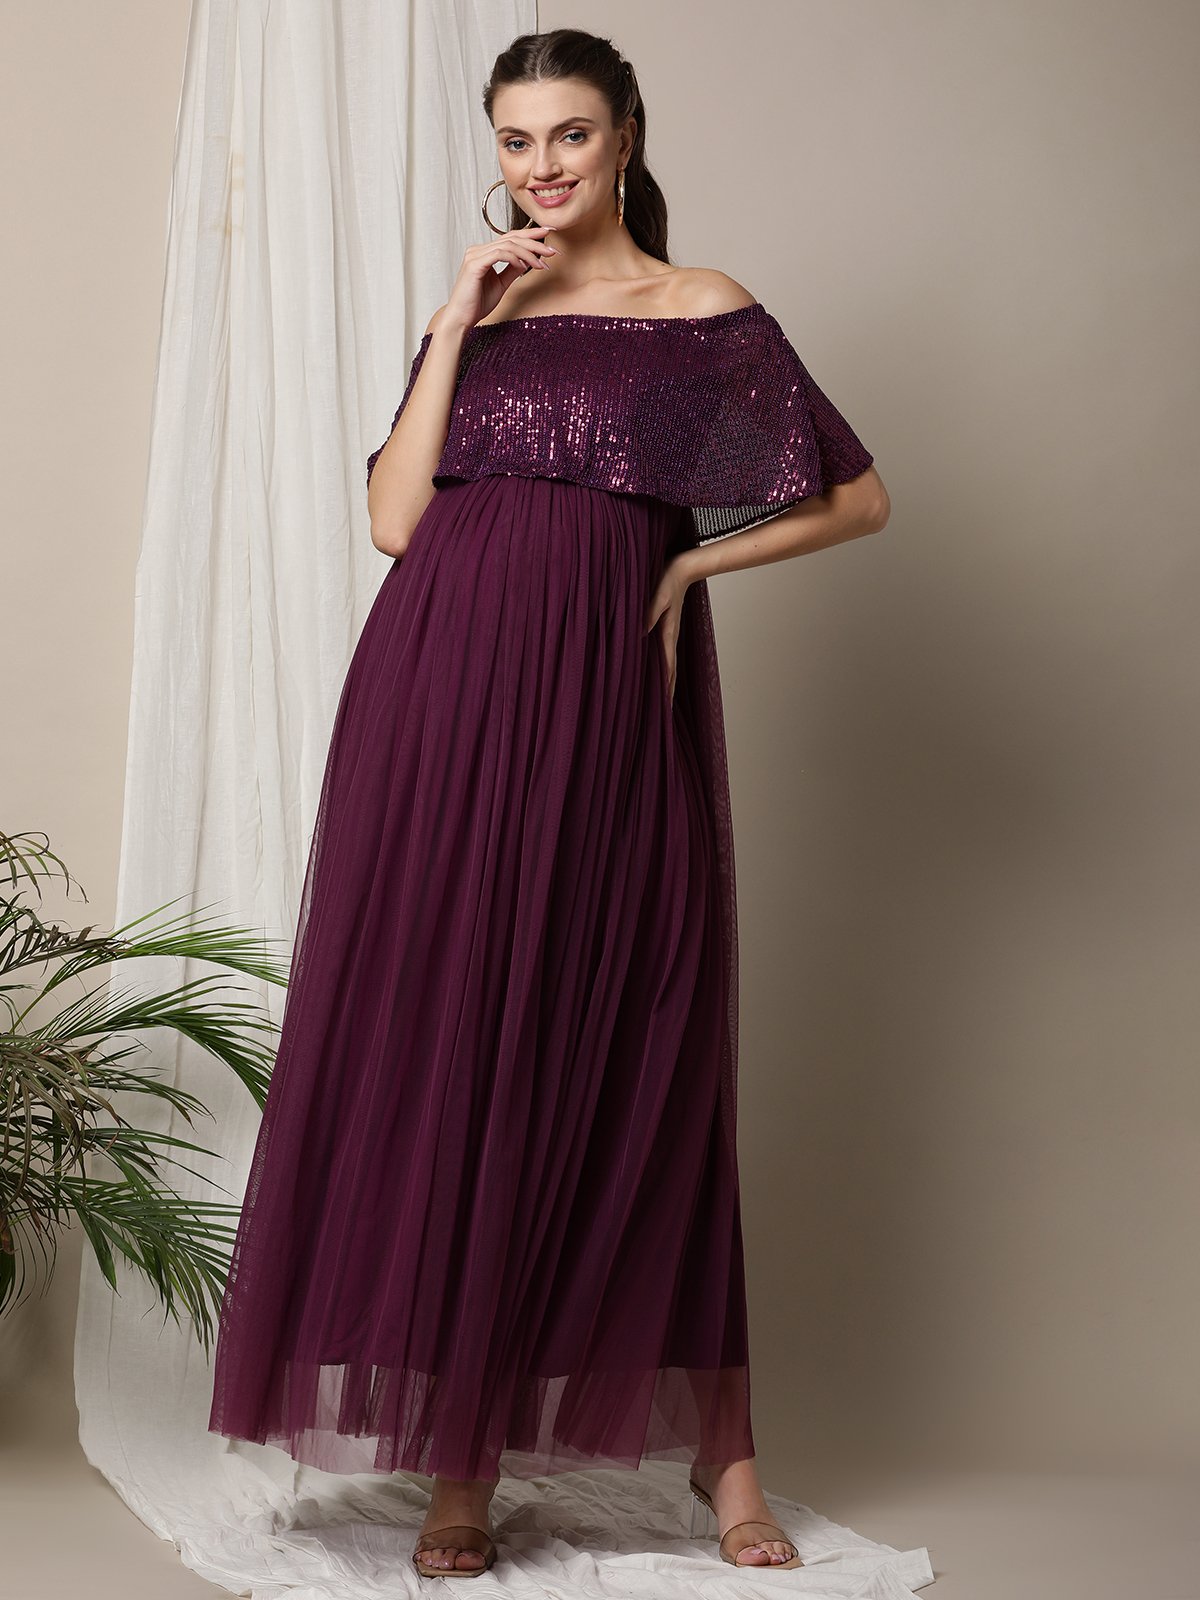 Maternity Wear - Buy Maternity Wear Online Starting at Just ₹269 | Meesho